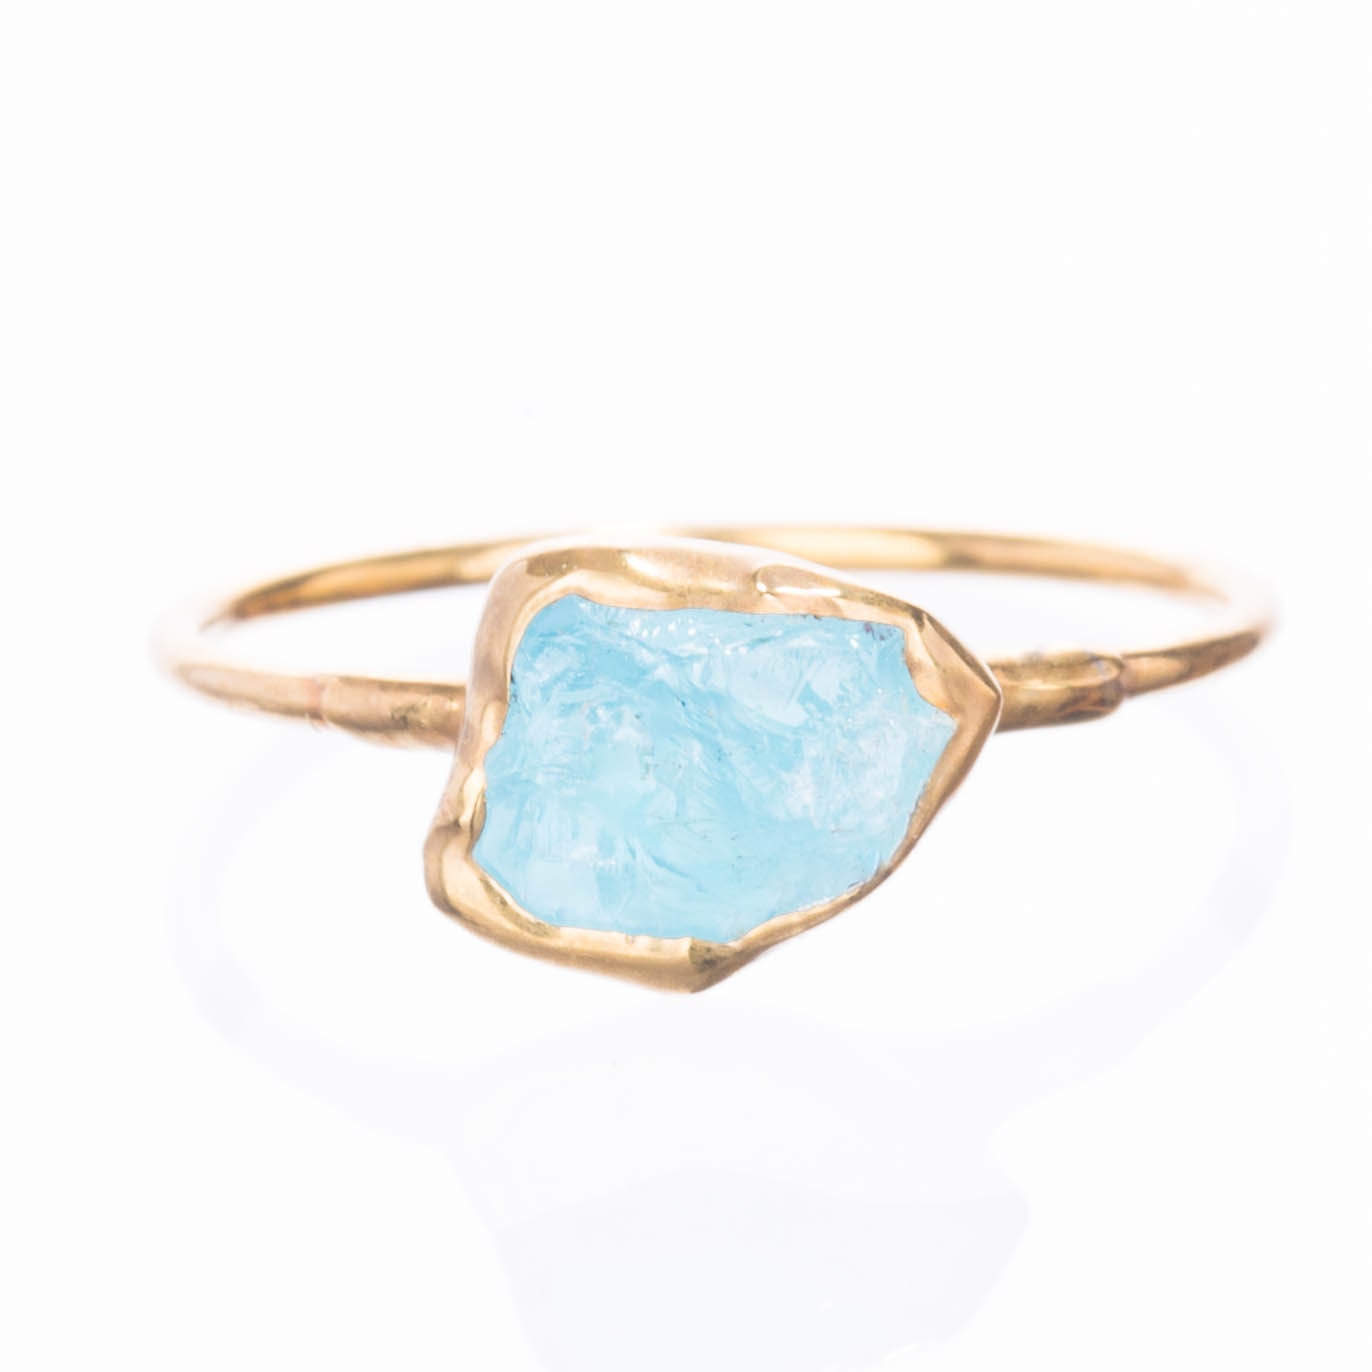 Raw Rough Stone Ring Raw Aquamarine Ring Healing Stone Ring Sterling Silver Ring Aquamarine Ring Crystal Raw Stone Ring Gift for Her